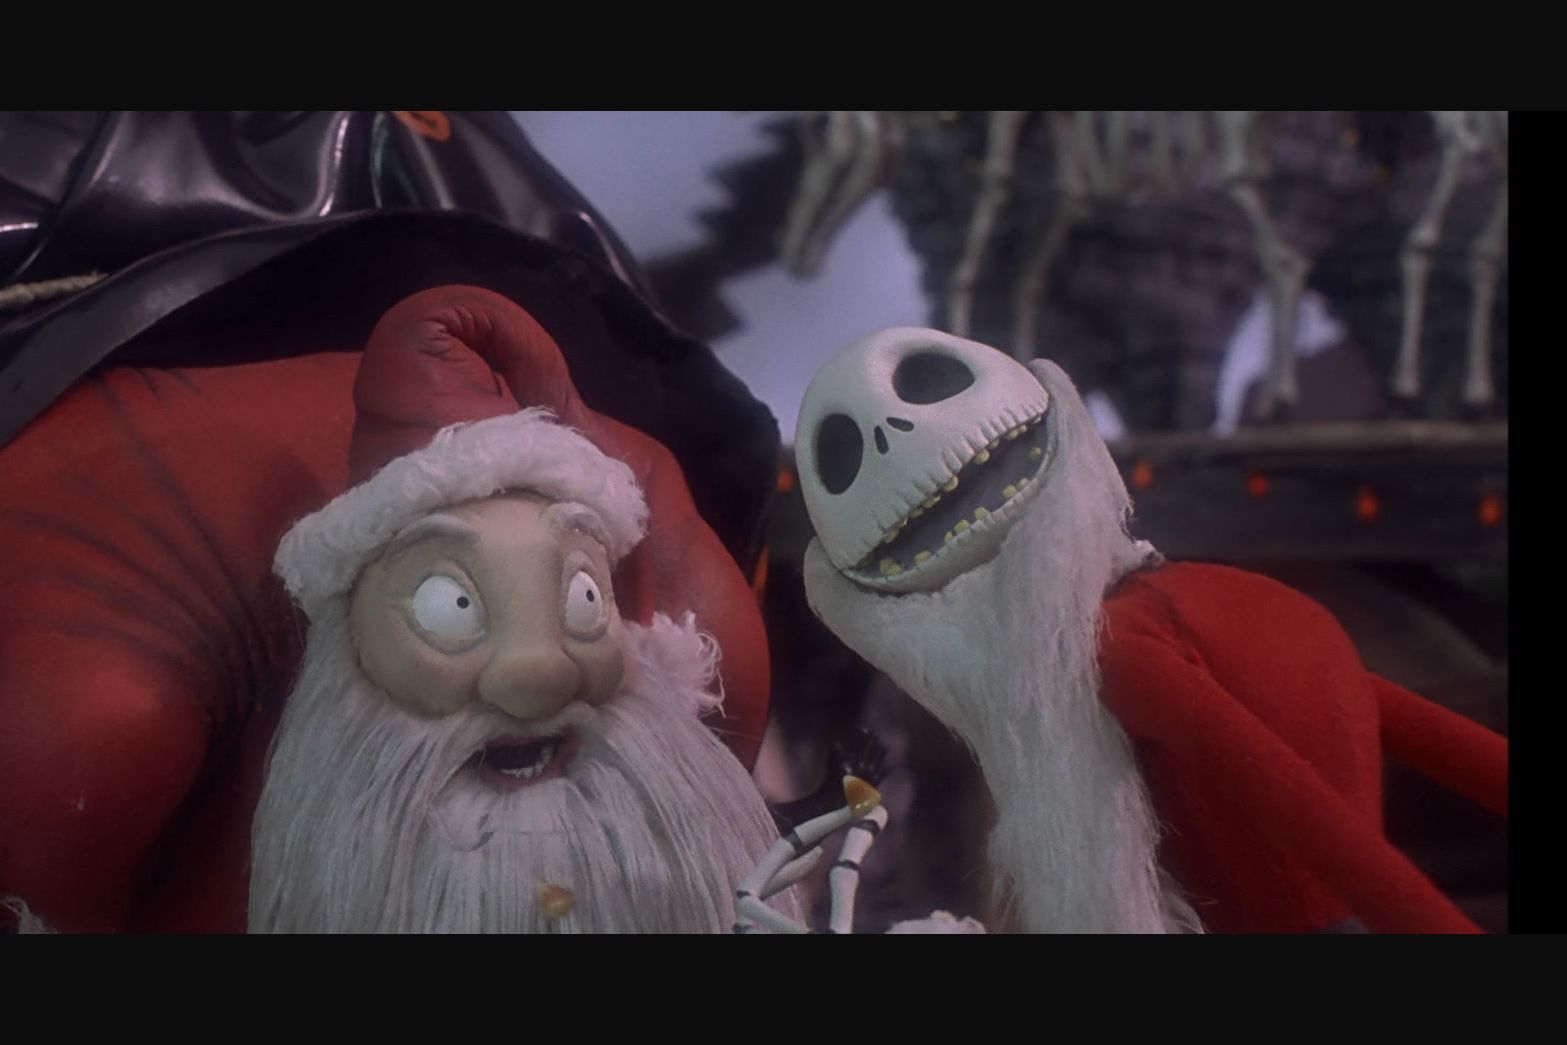 When do you watch the movie "The Nightmare Before Christmas"